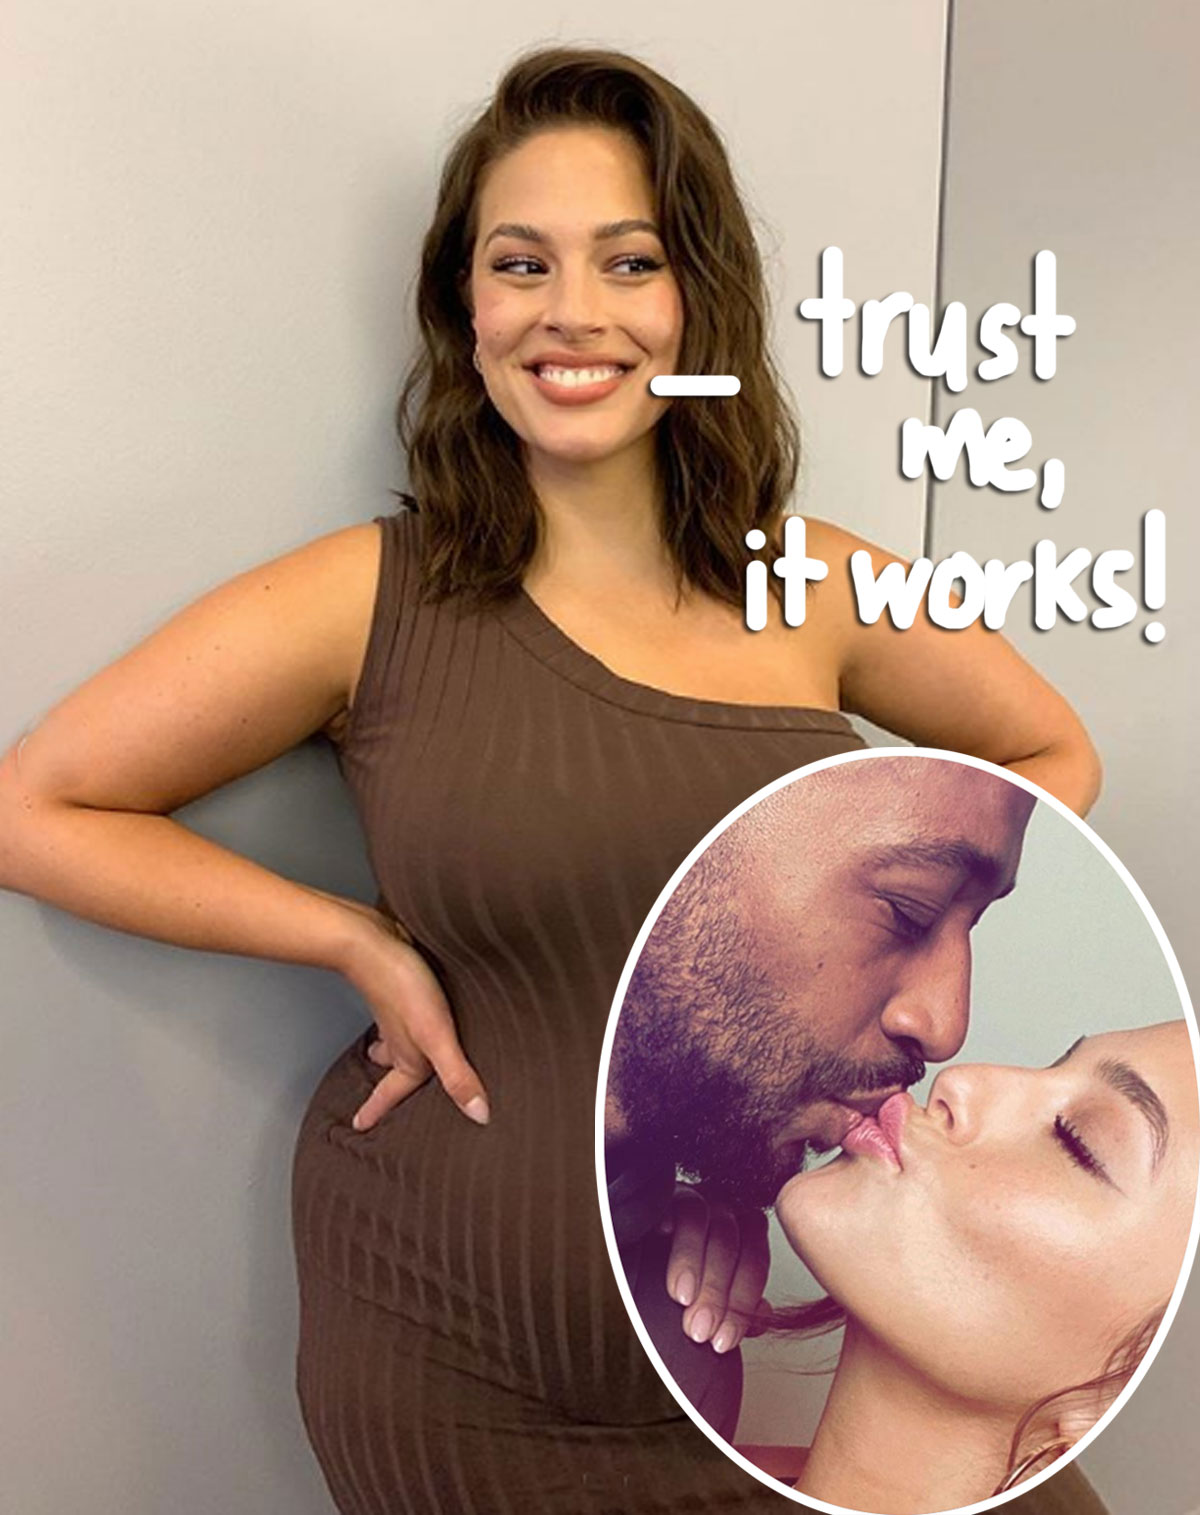 Ashley Graham is expecting her first child!